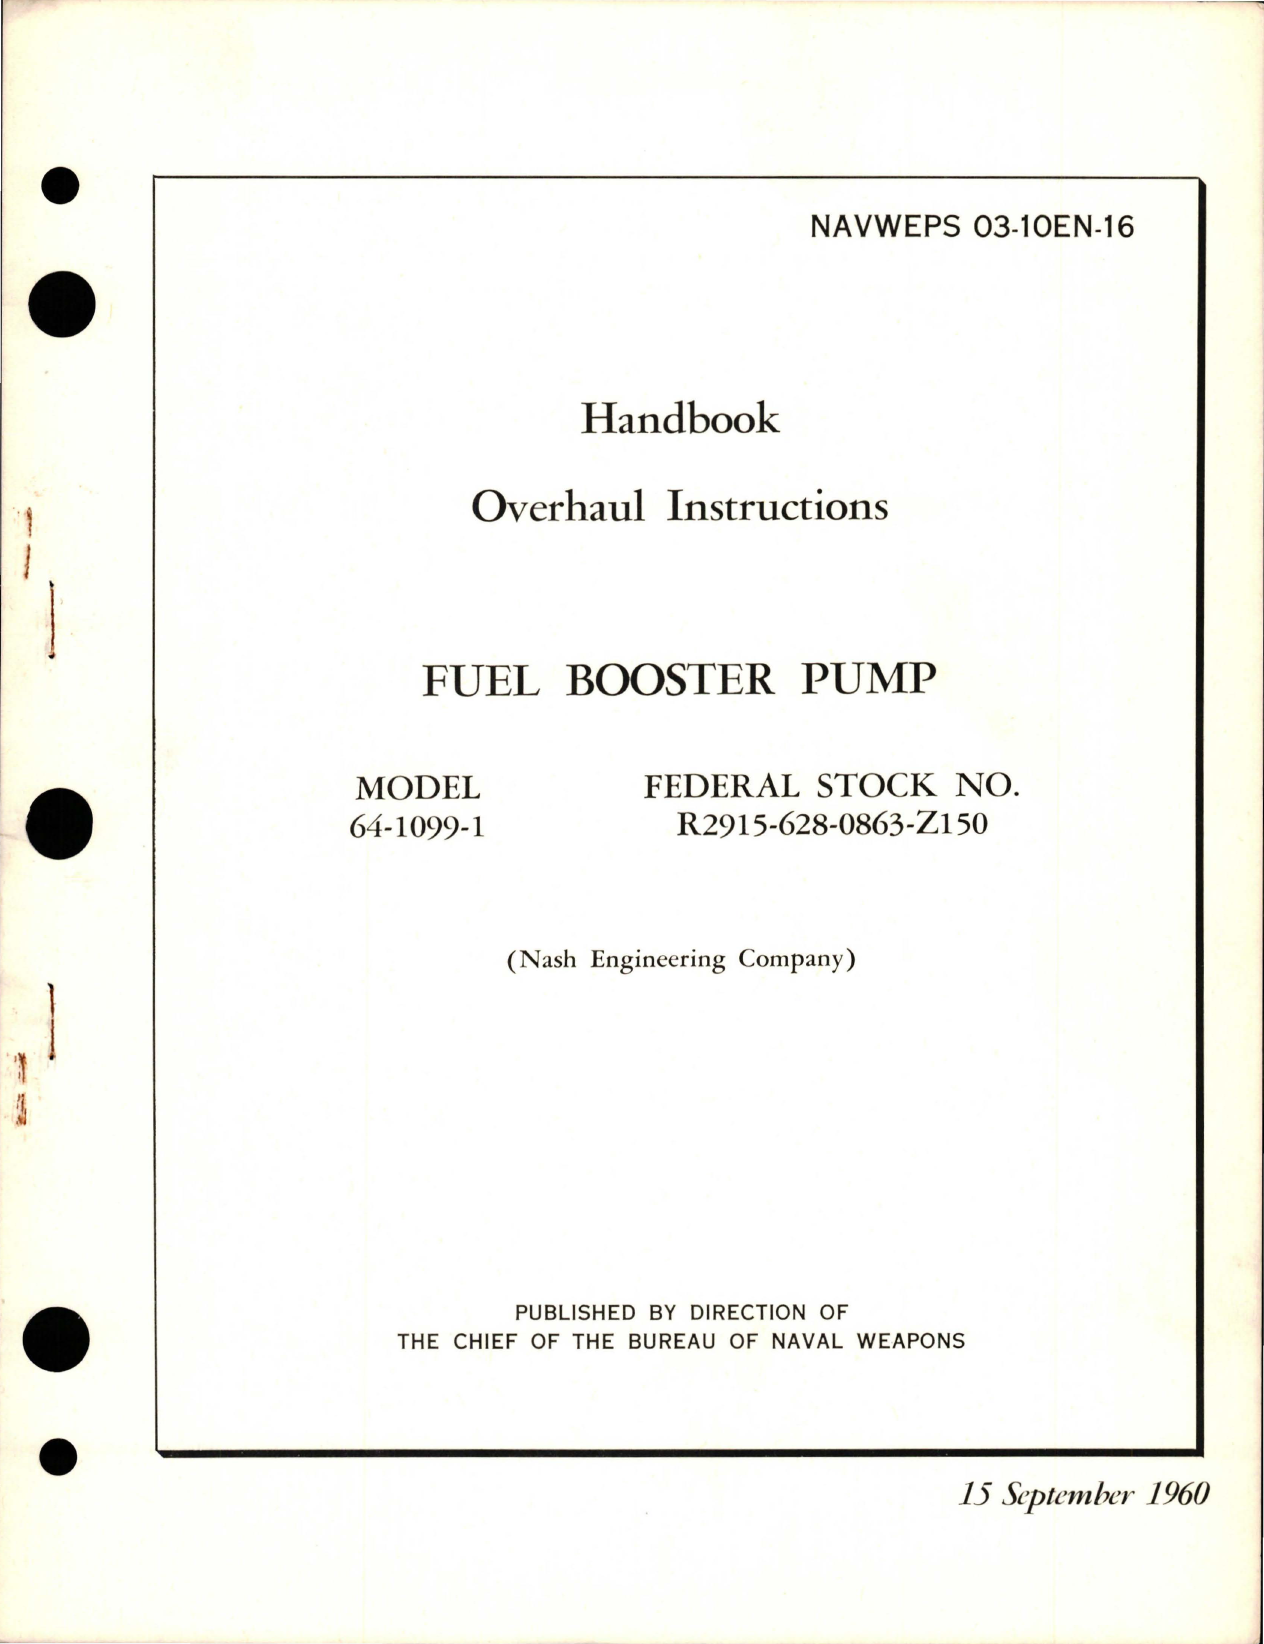 Sample page 1 from AirCorps Library document: Overhaul Instructions for Fuel Booster Pump - Model 64-1099-1